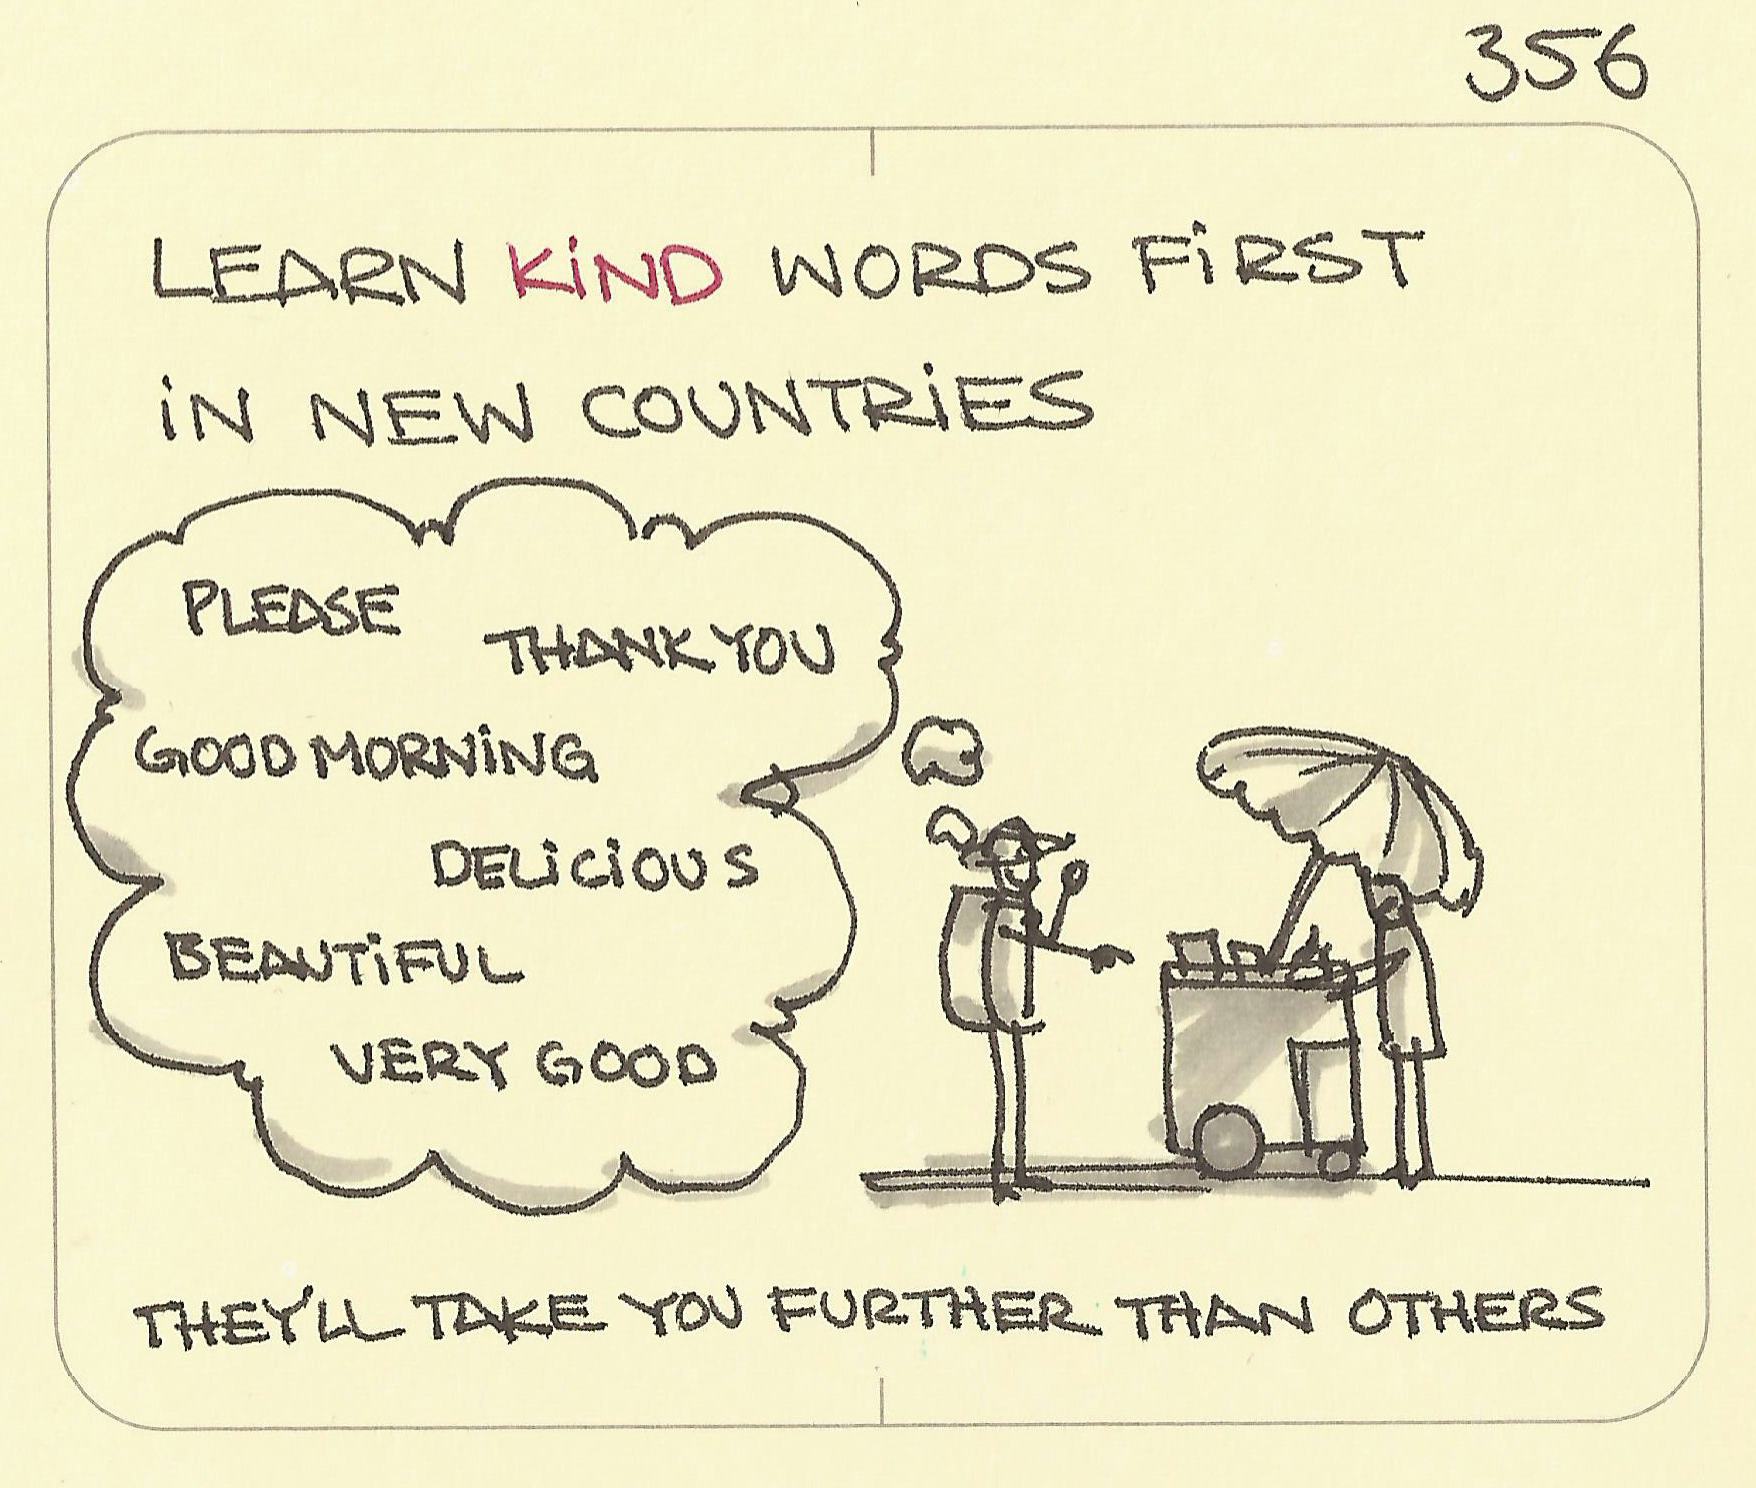 Learn kind words first in new countries: a backpacker says nice things to a local seller with a cart, no doubt gets smiles in return